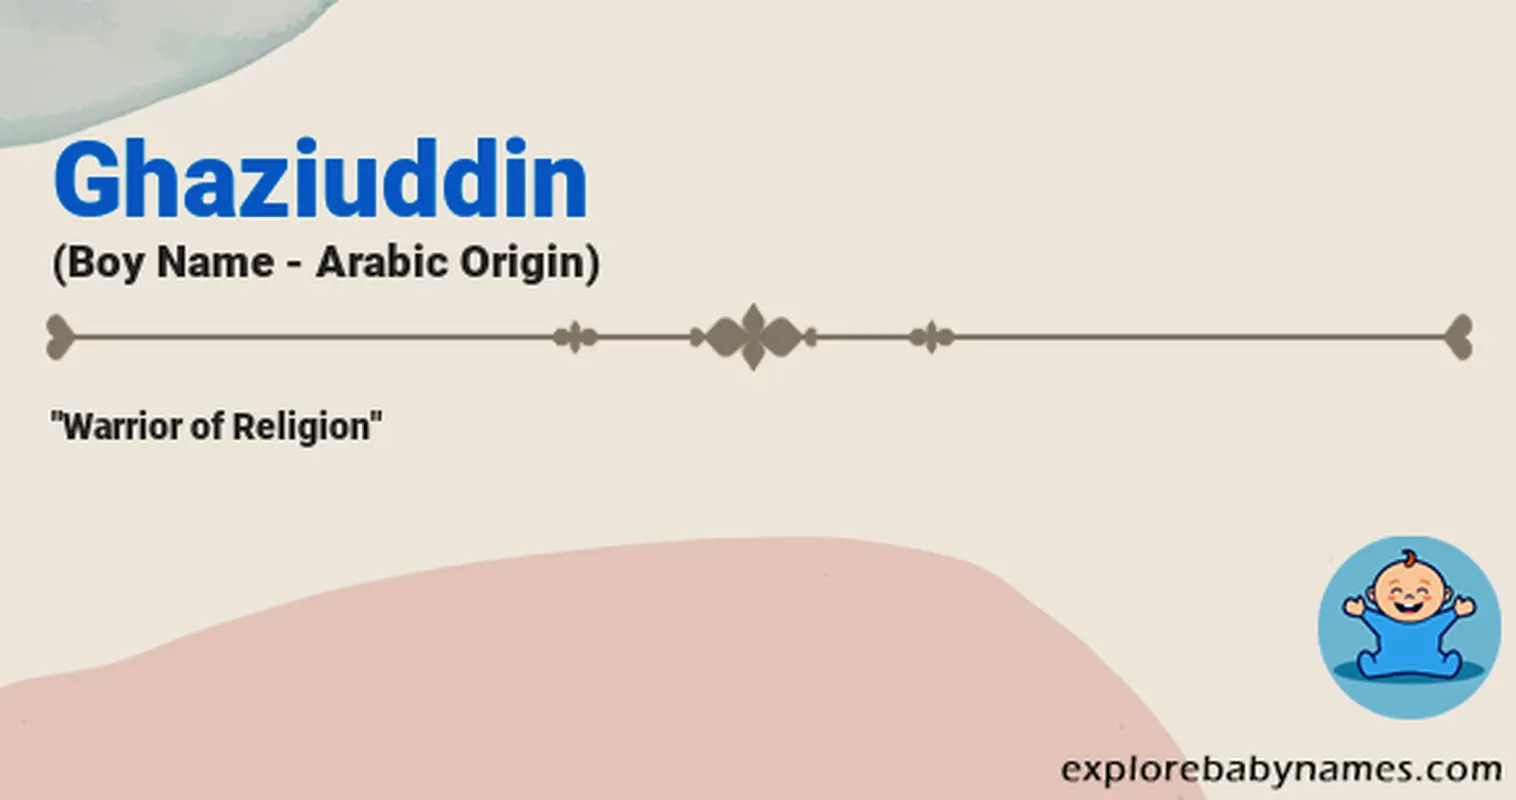 Meaning of Ghaziuddin